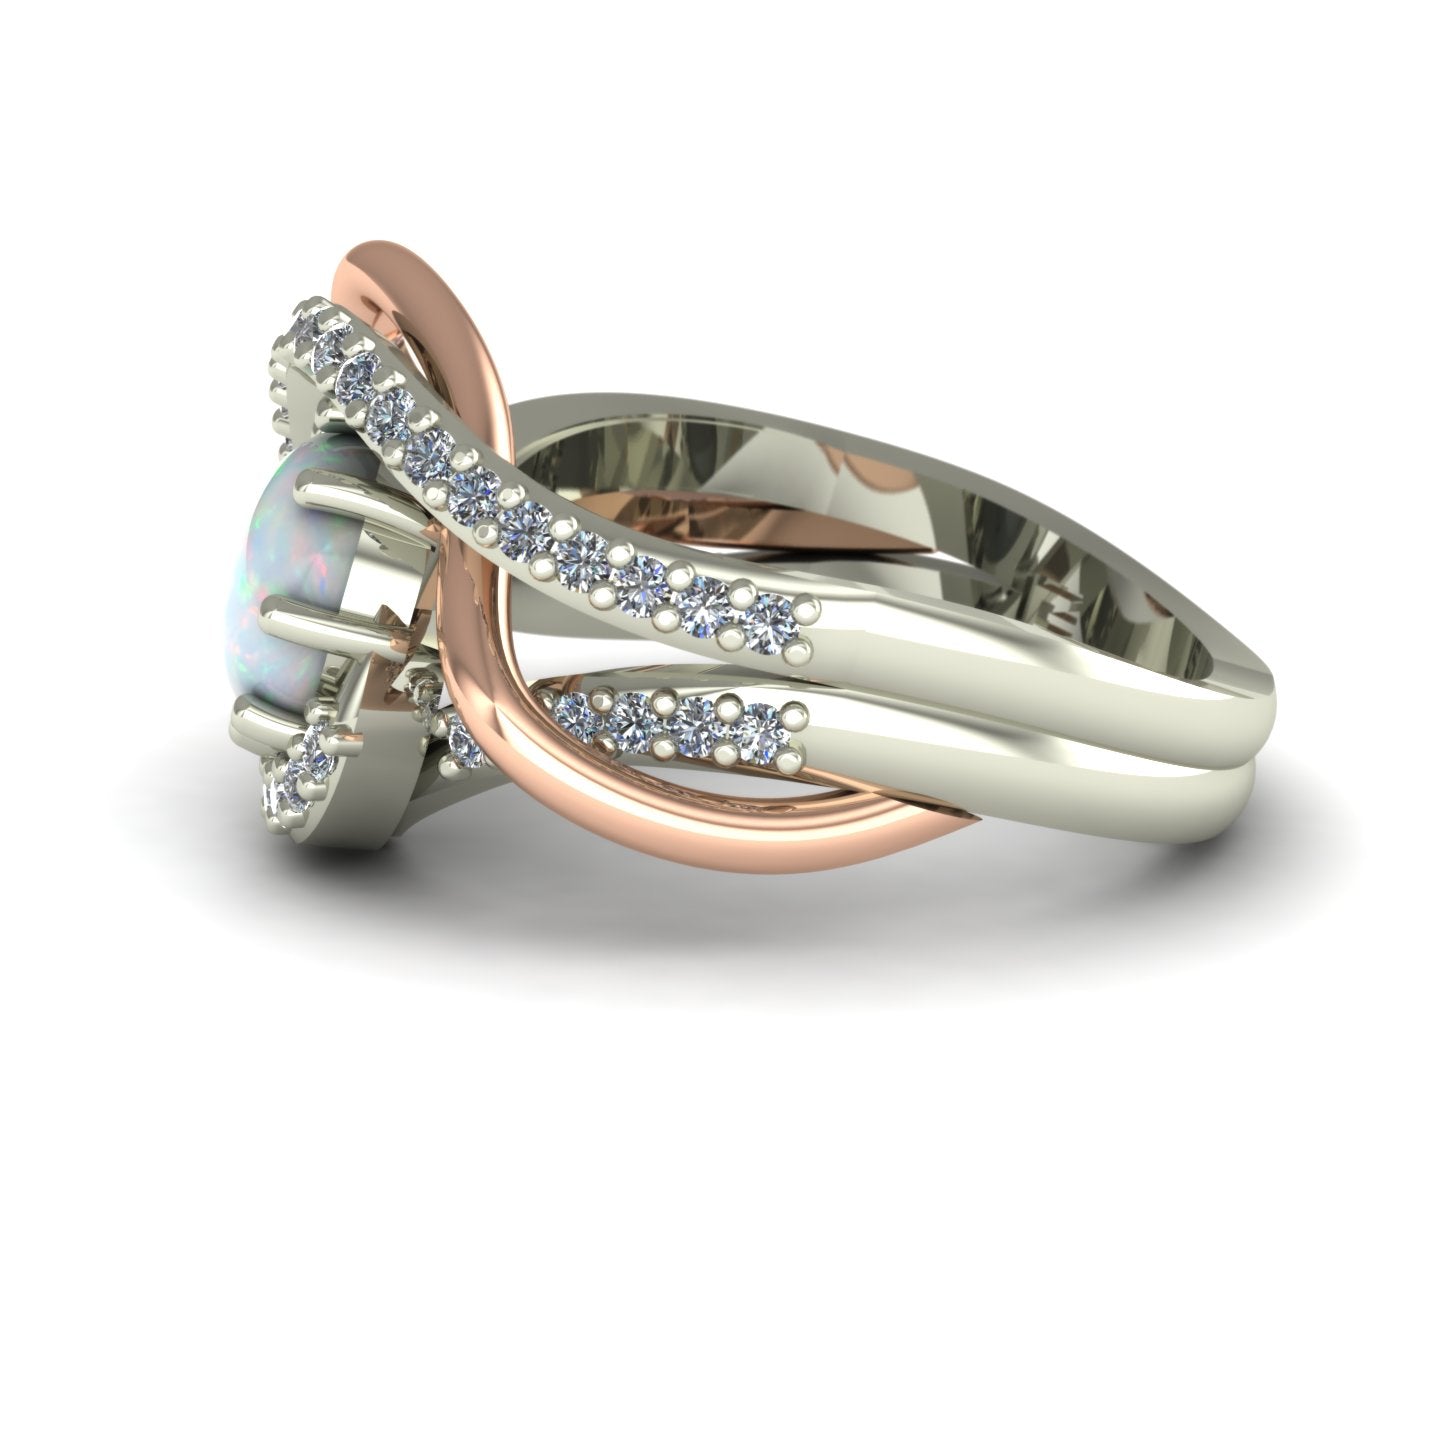 opal and diamond two tone abstract ring in 14k rose and white gold - Charles Babb Designs - side view